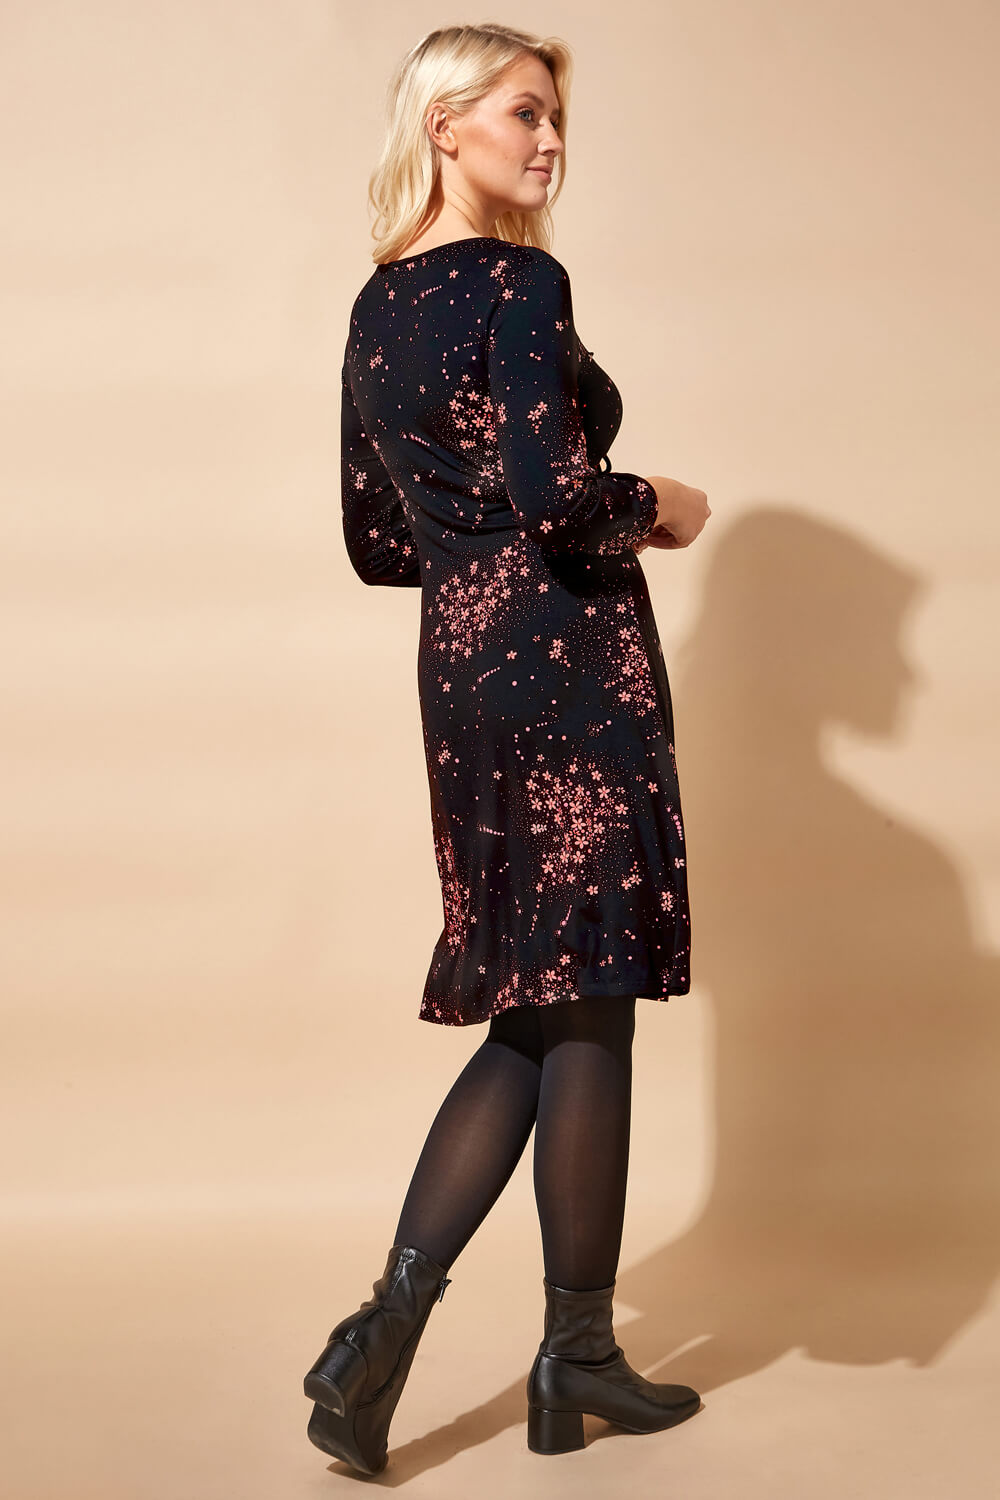 Black Ditsy Floral Tie Front Dress, Image 3 of 4